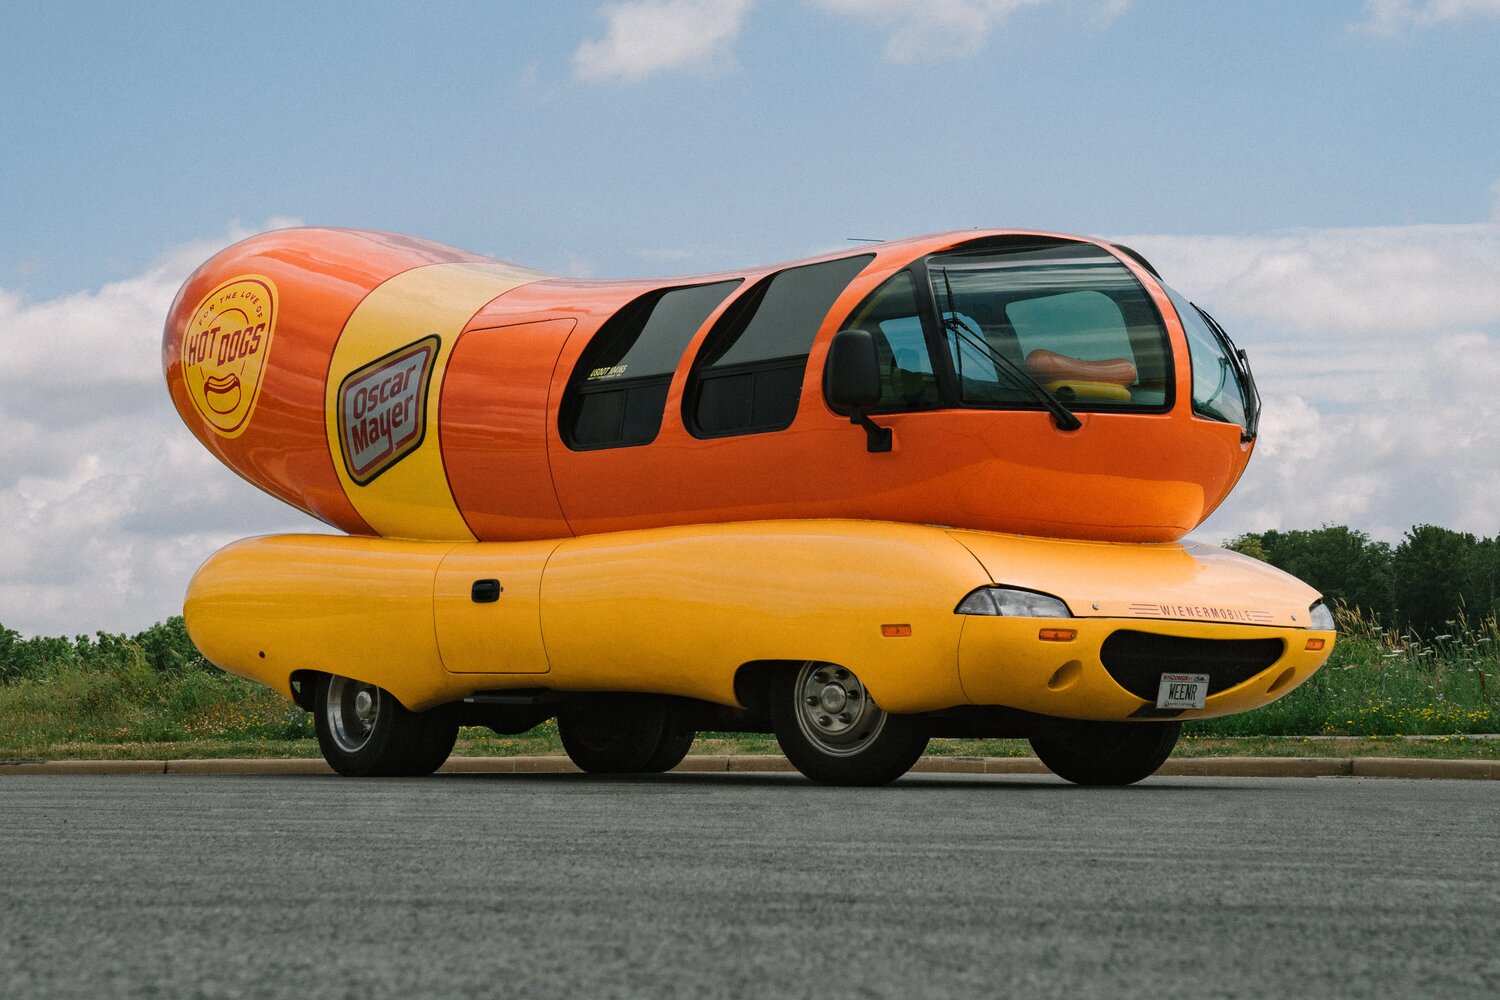 The Oscar Mayer Wienermobile will visit multiple senior centers and Fire Station 9 on Oct. 25, according to a city news release.